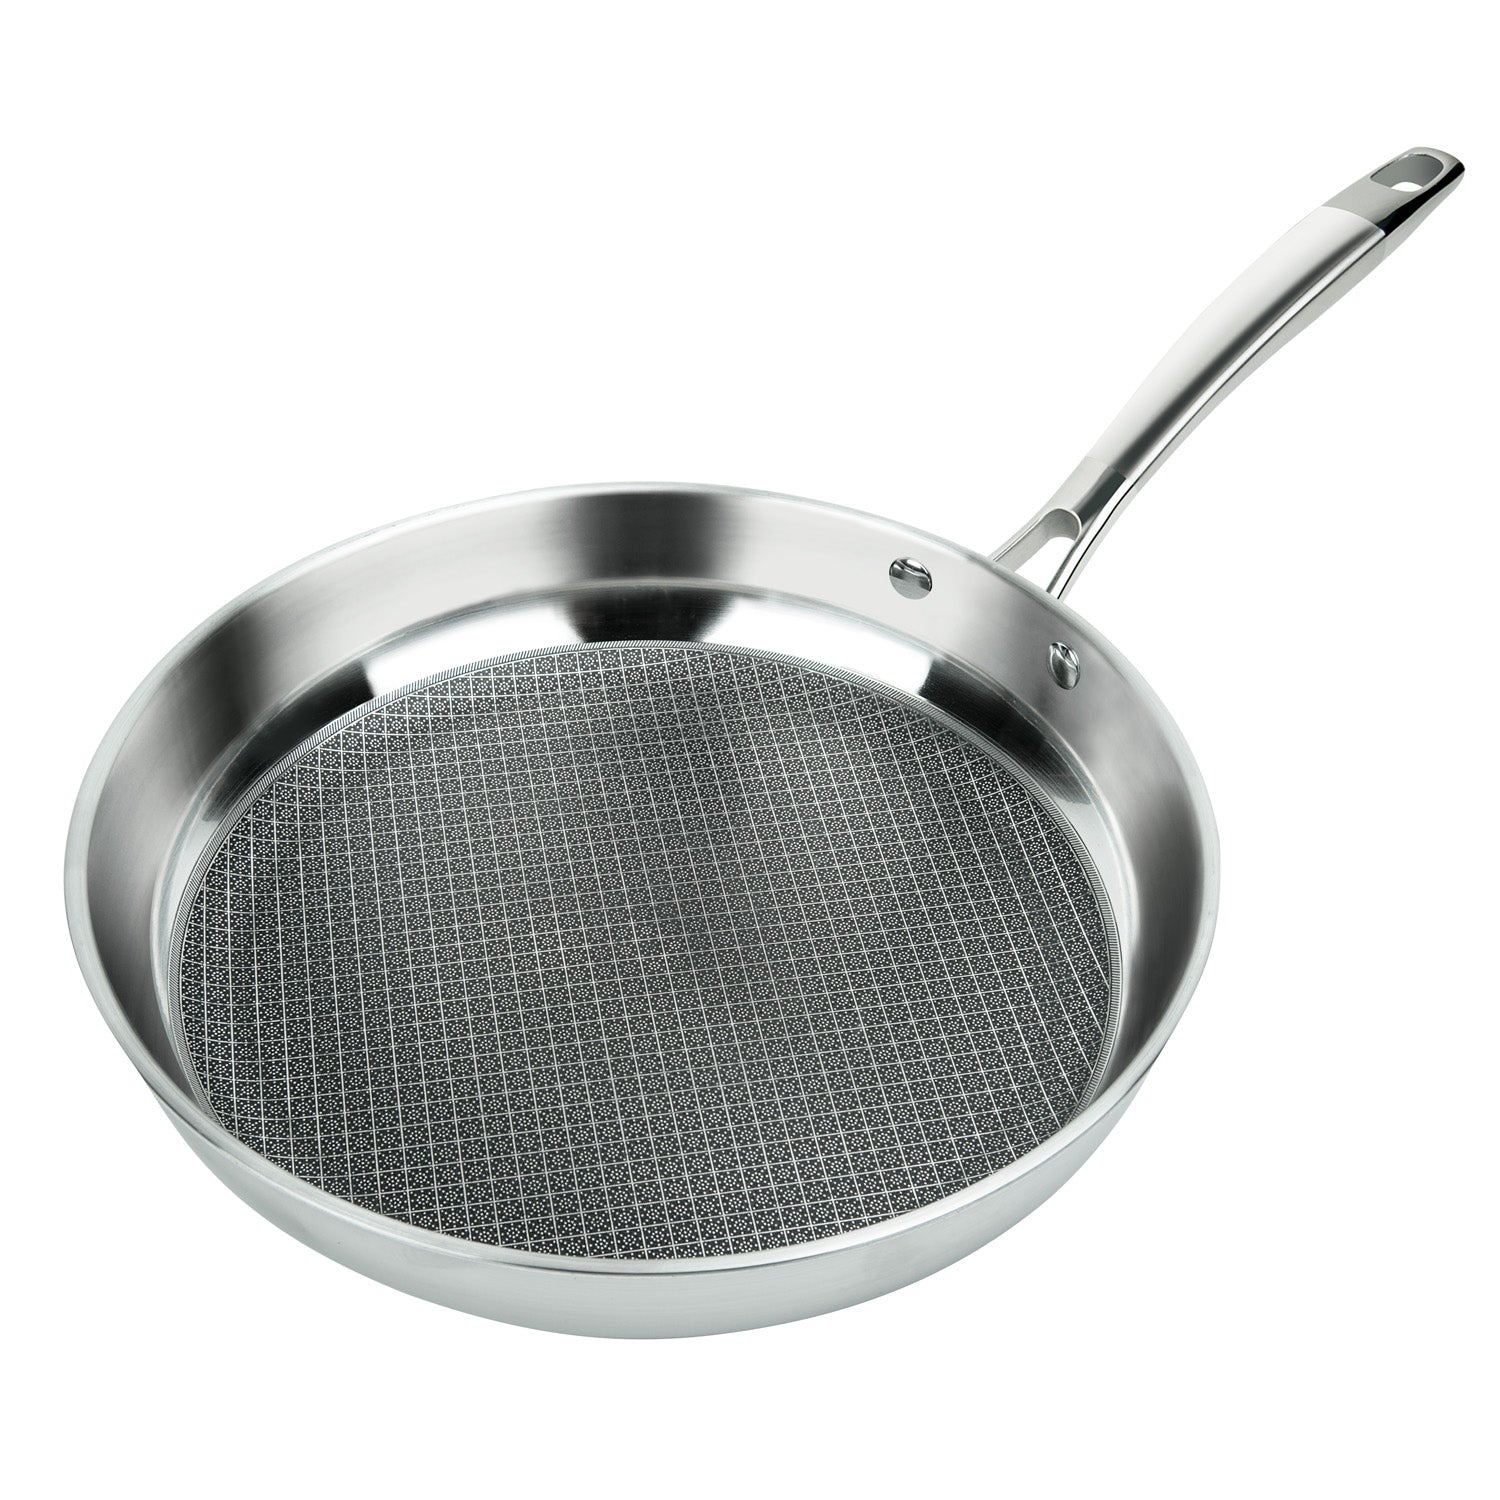 3-PLY FRY PAN & SKILLET STAINLESS STEEL & ALUMINUM SCRATCH-RESISTANT, 9